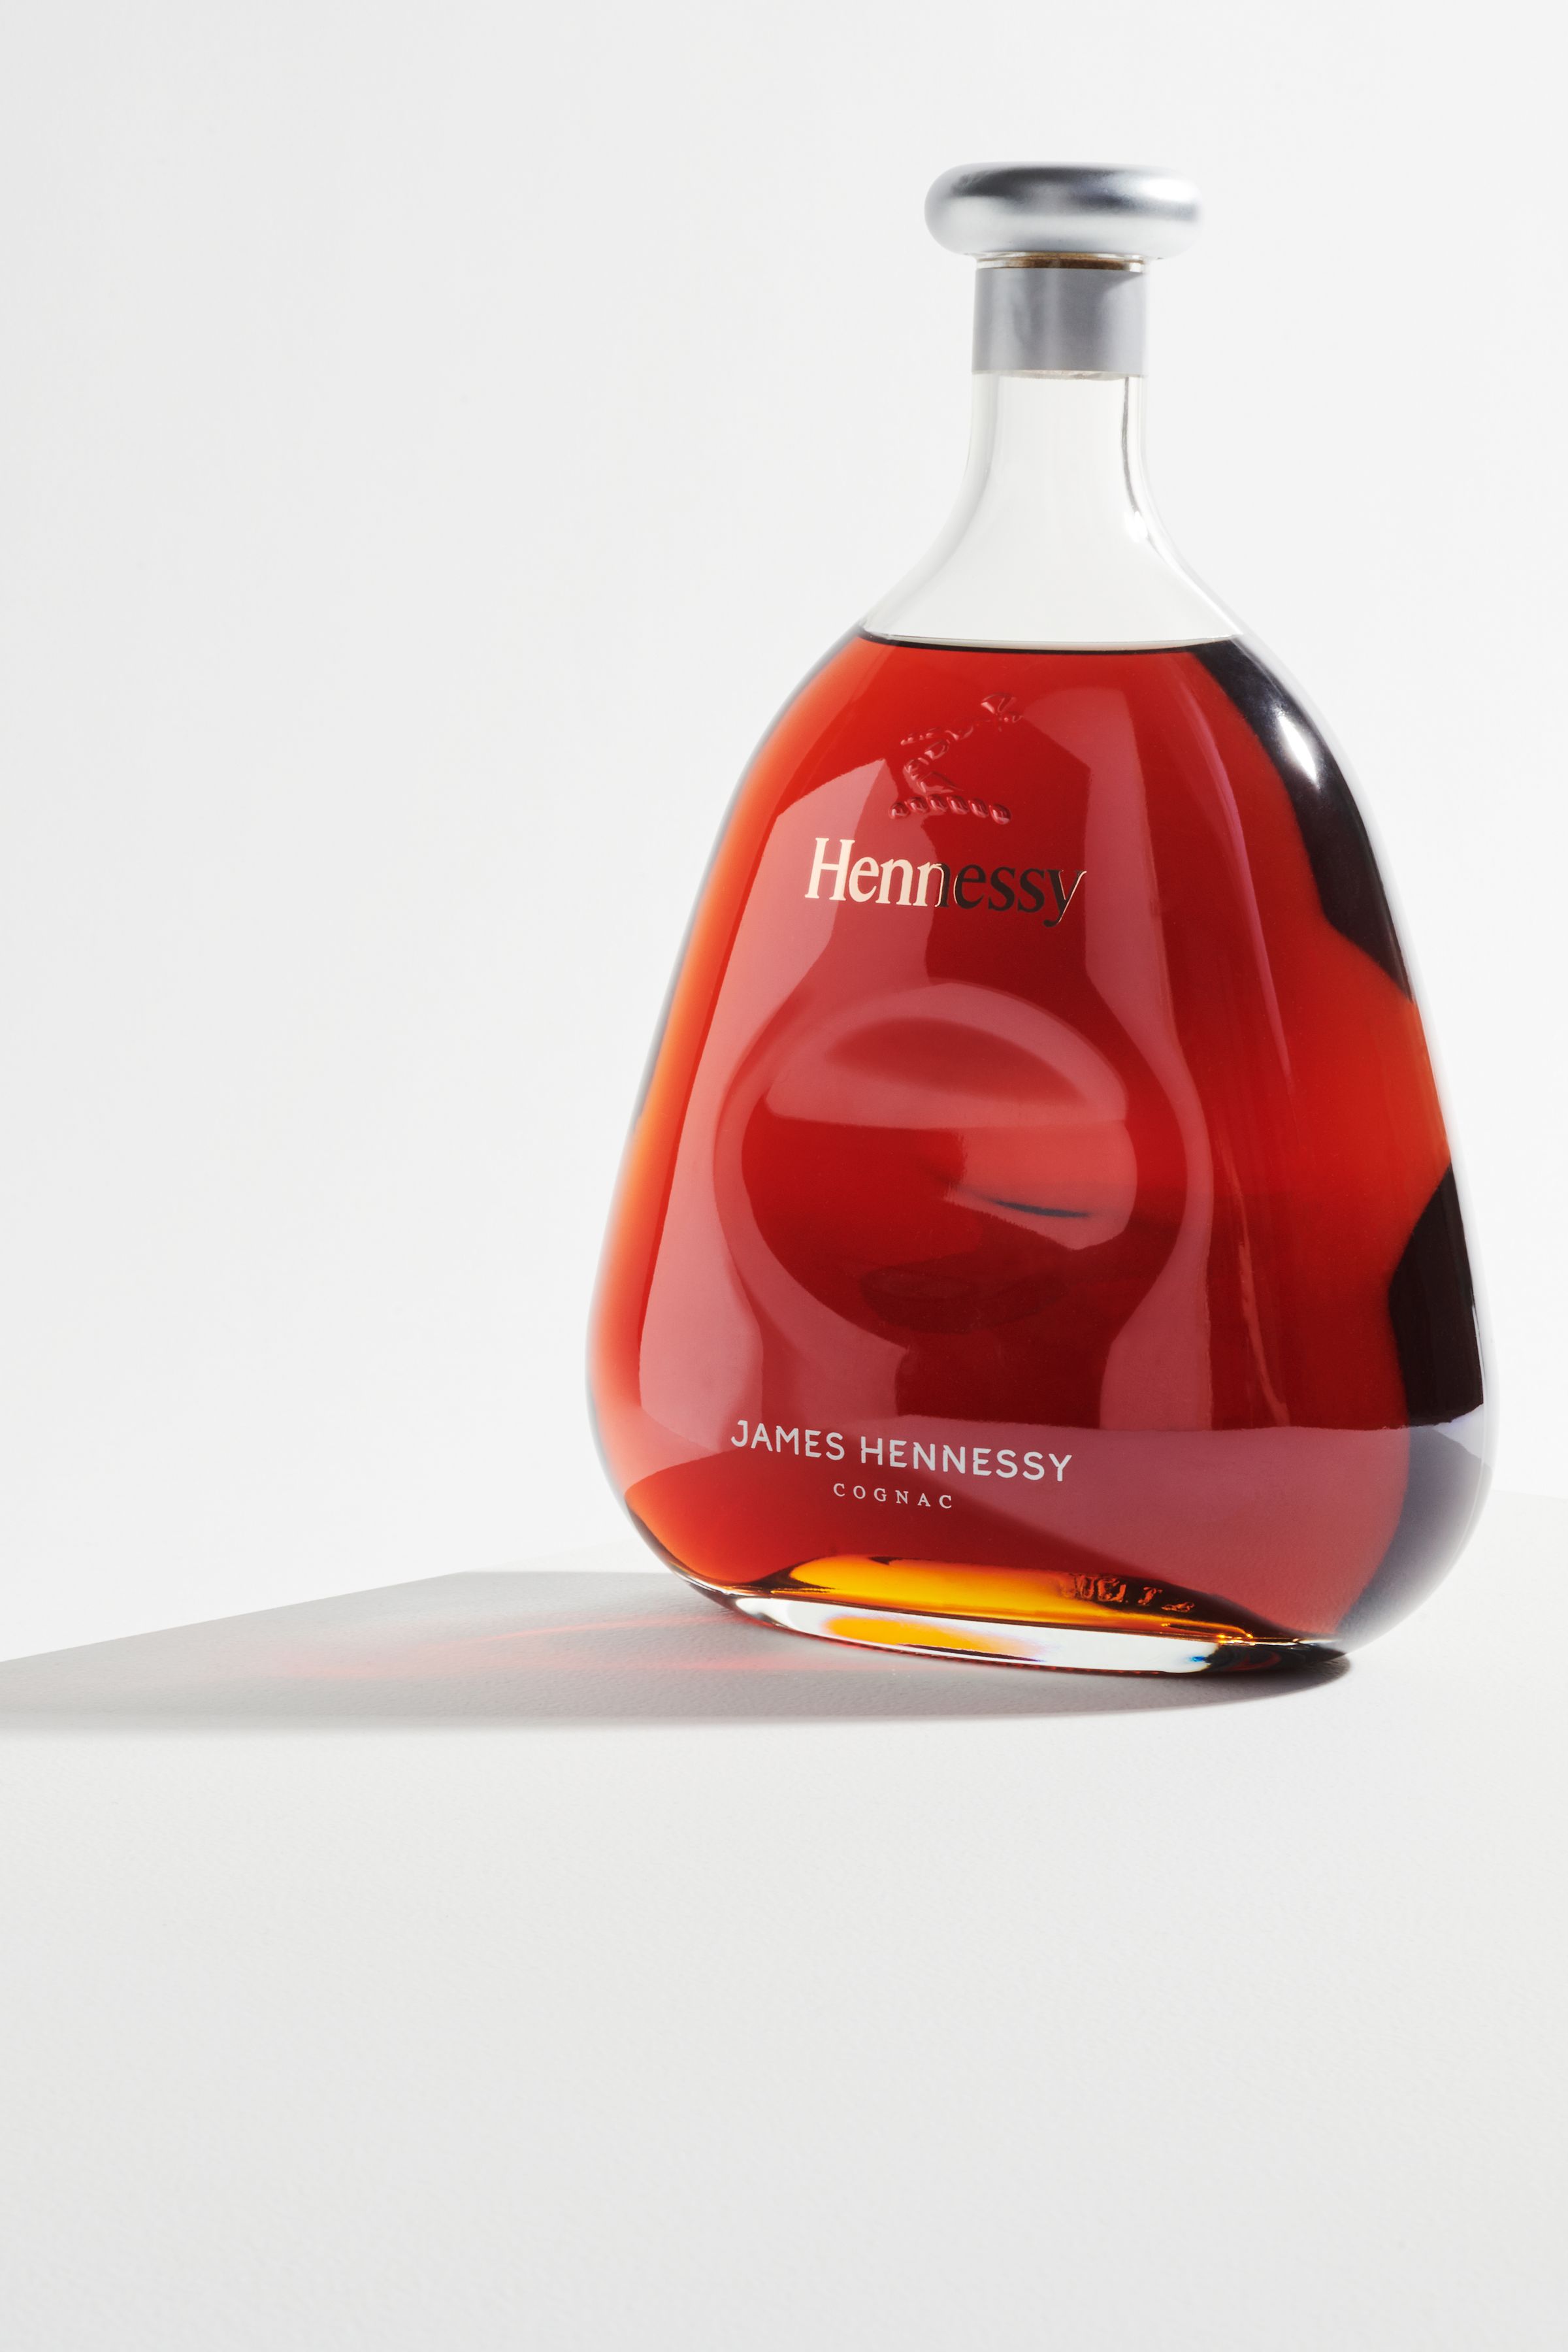 James Hennessy logo applied to bottle